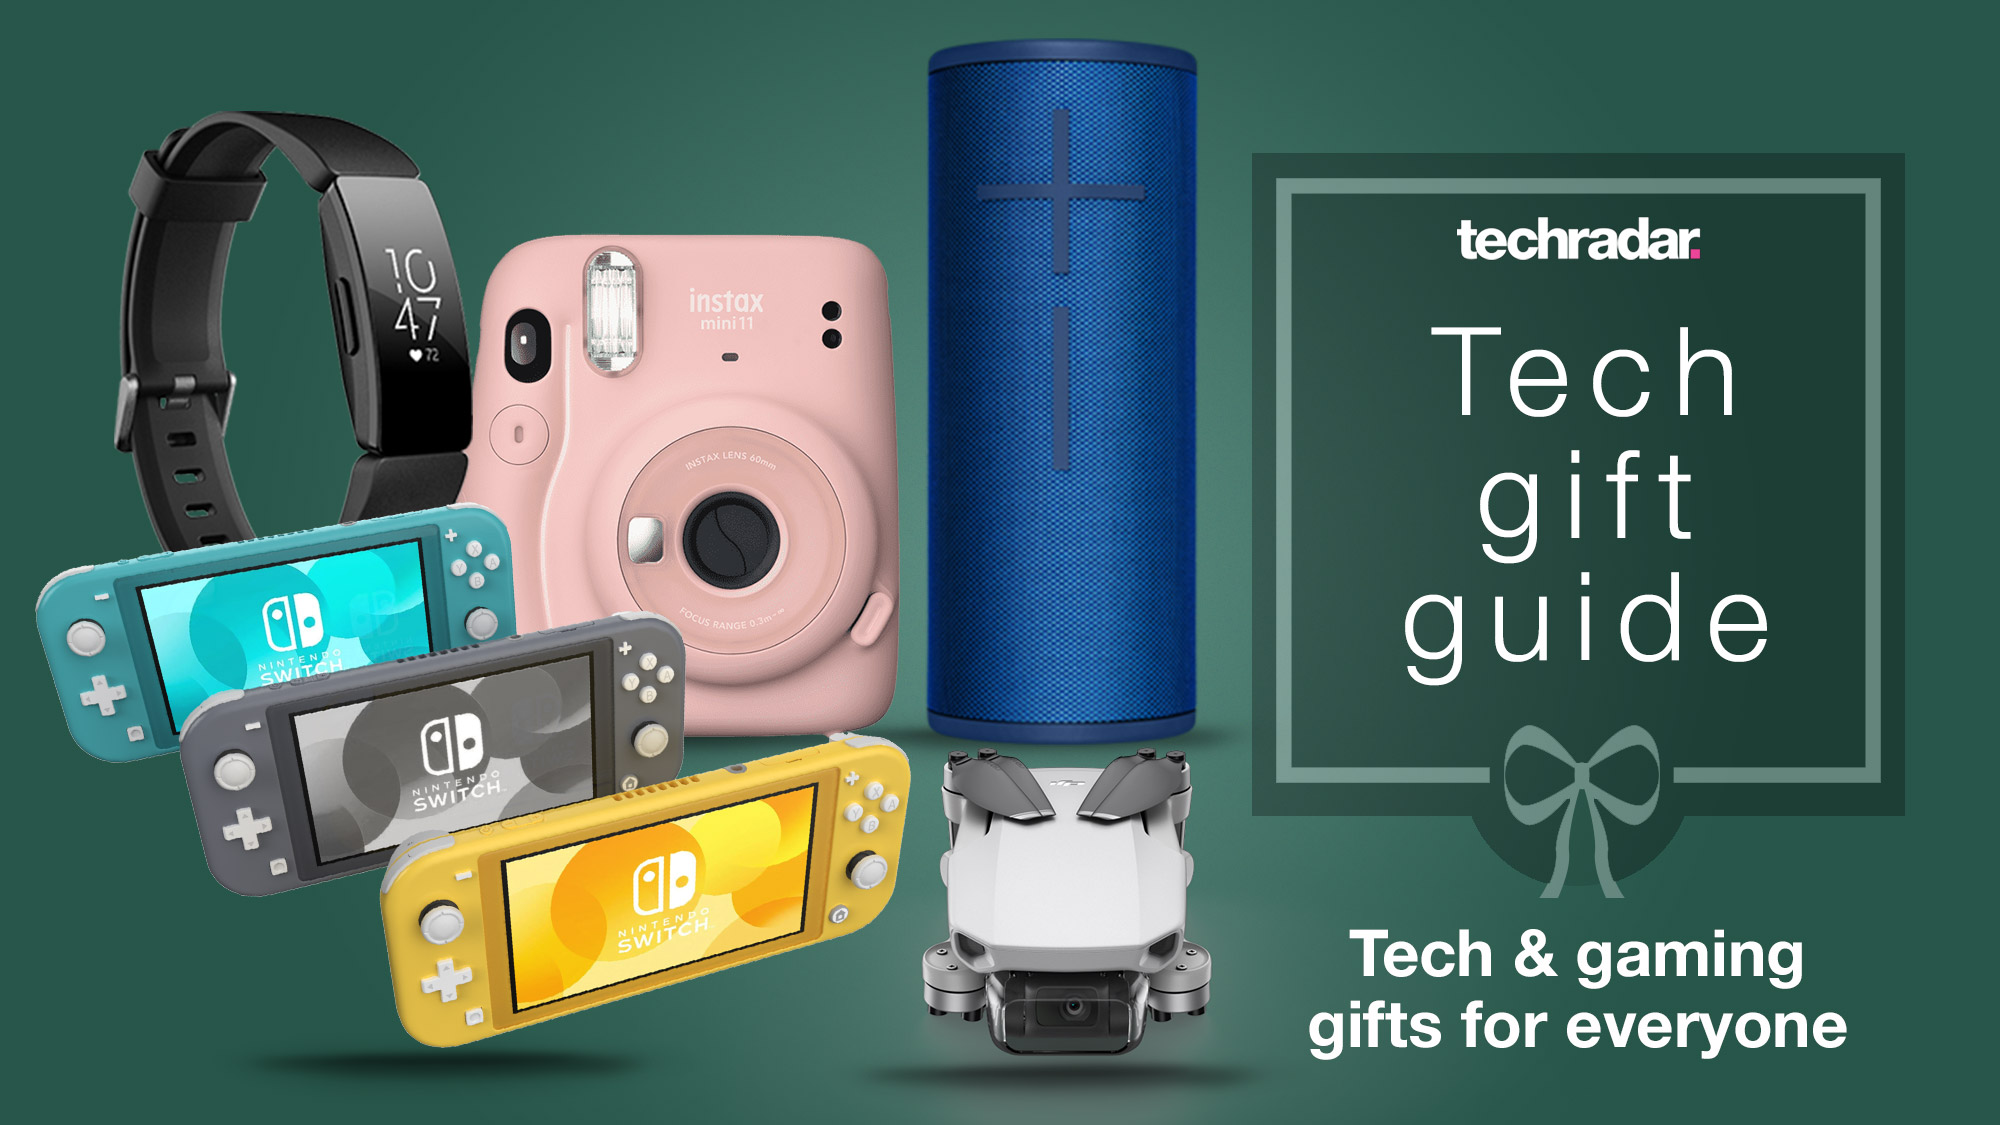 11 cheap gift ideas that actually make life easier - Android Authority